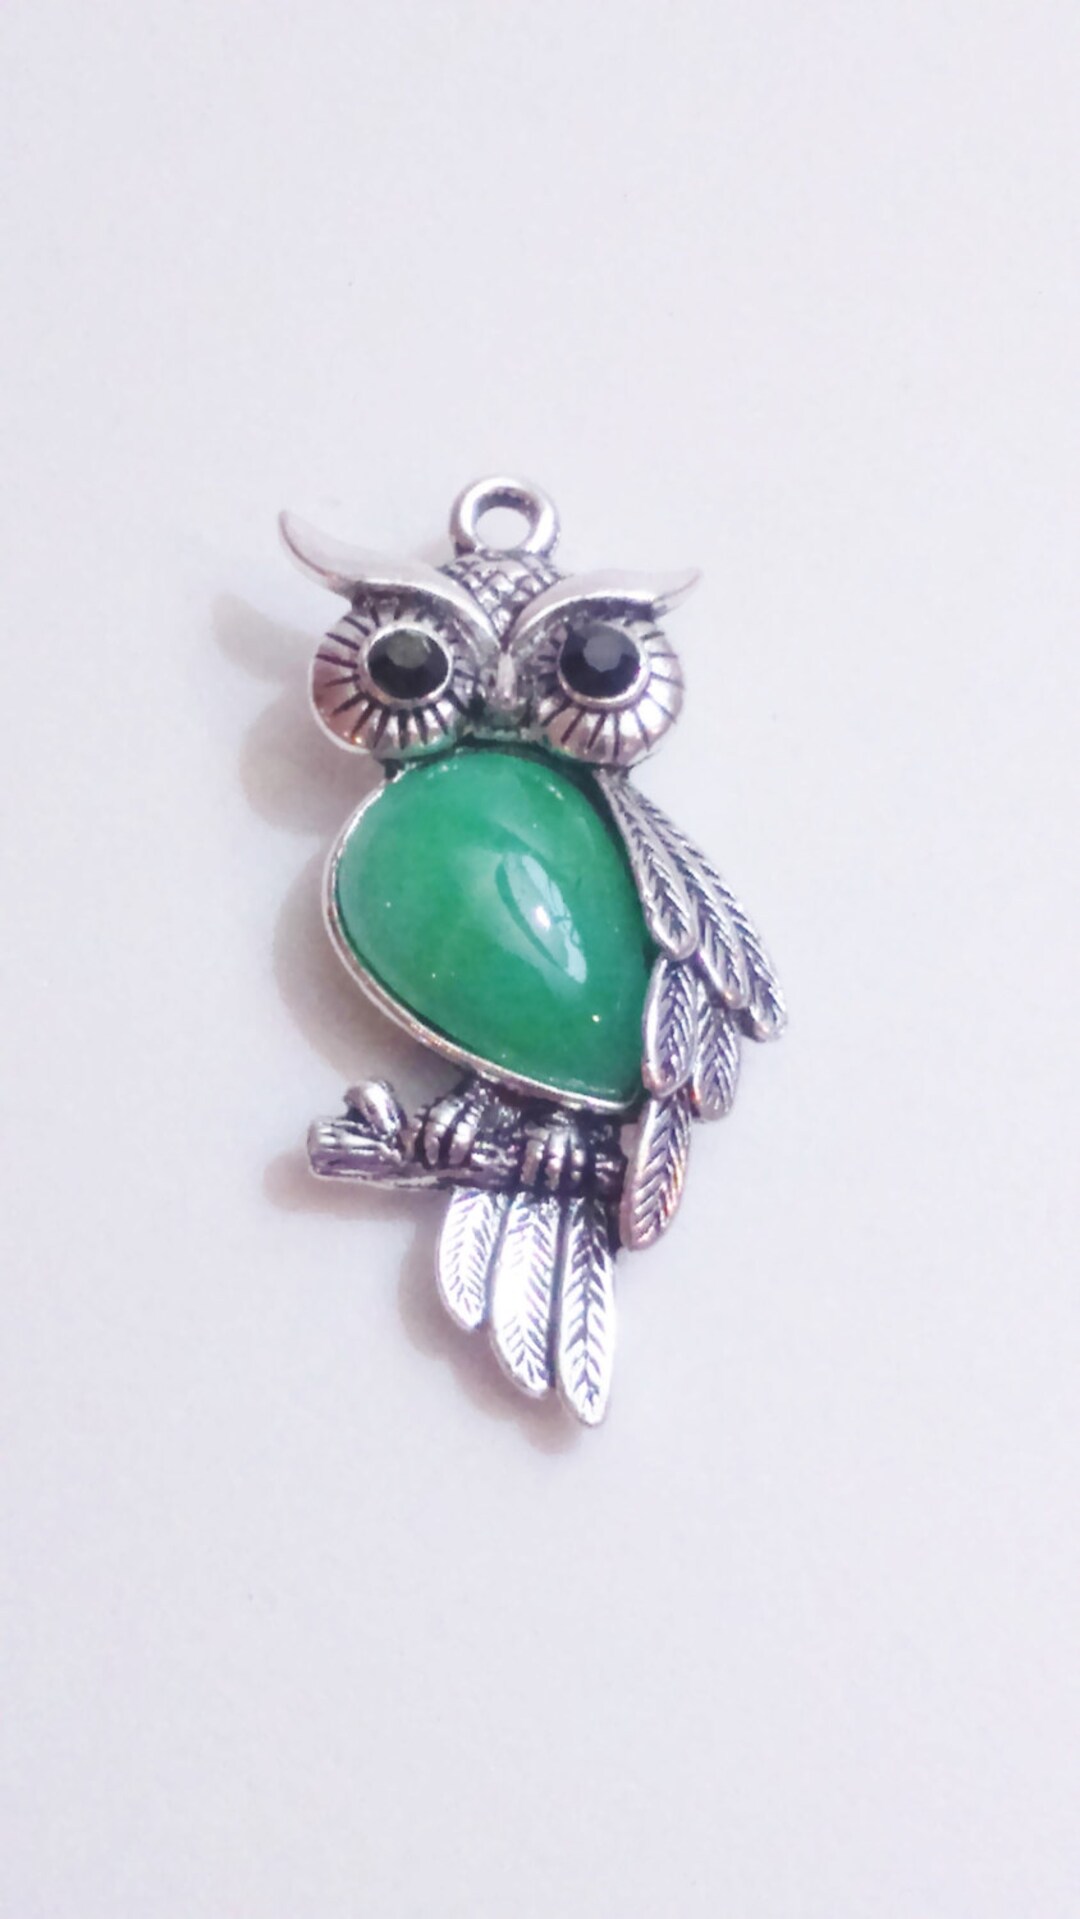 1x Owl Pendant Silver Green Stone 45 Mm Charm Animal Findings - Etsy